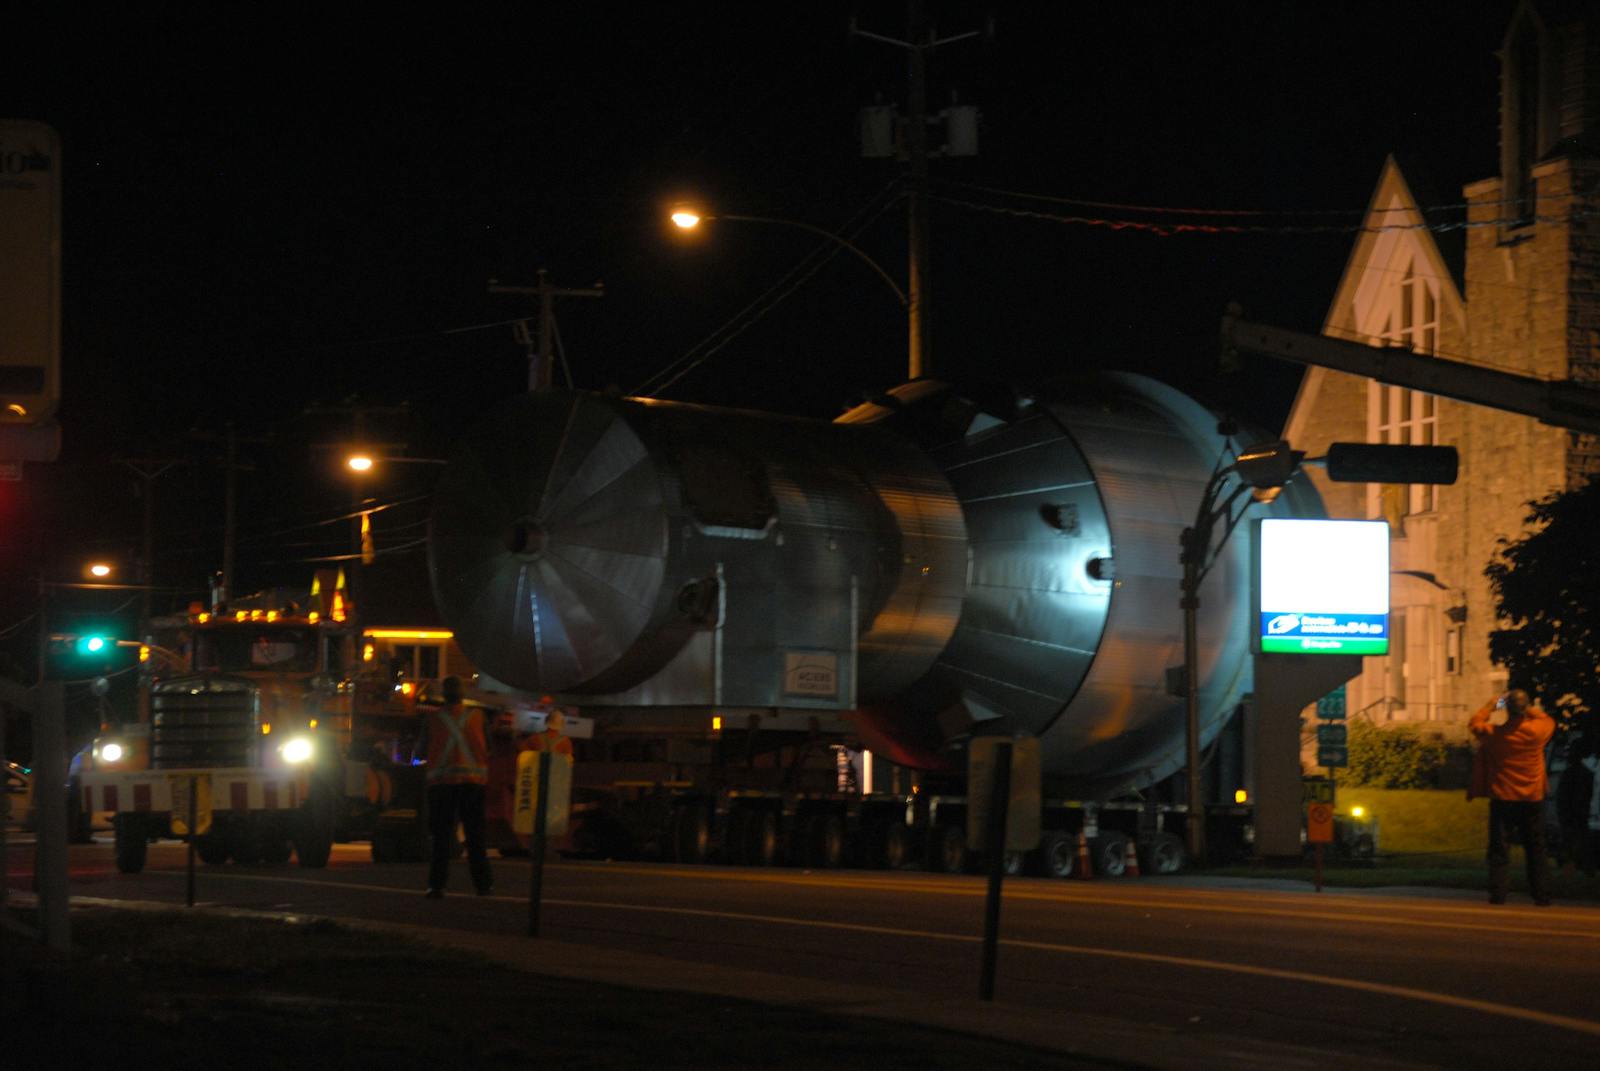 uge steel component being transported in the street